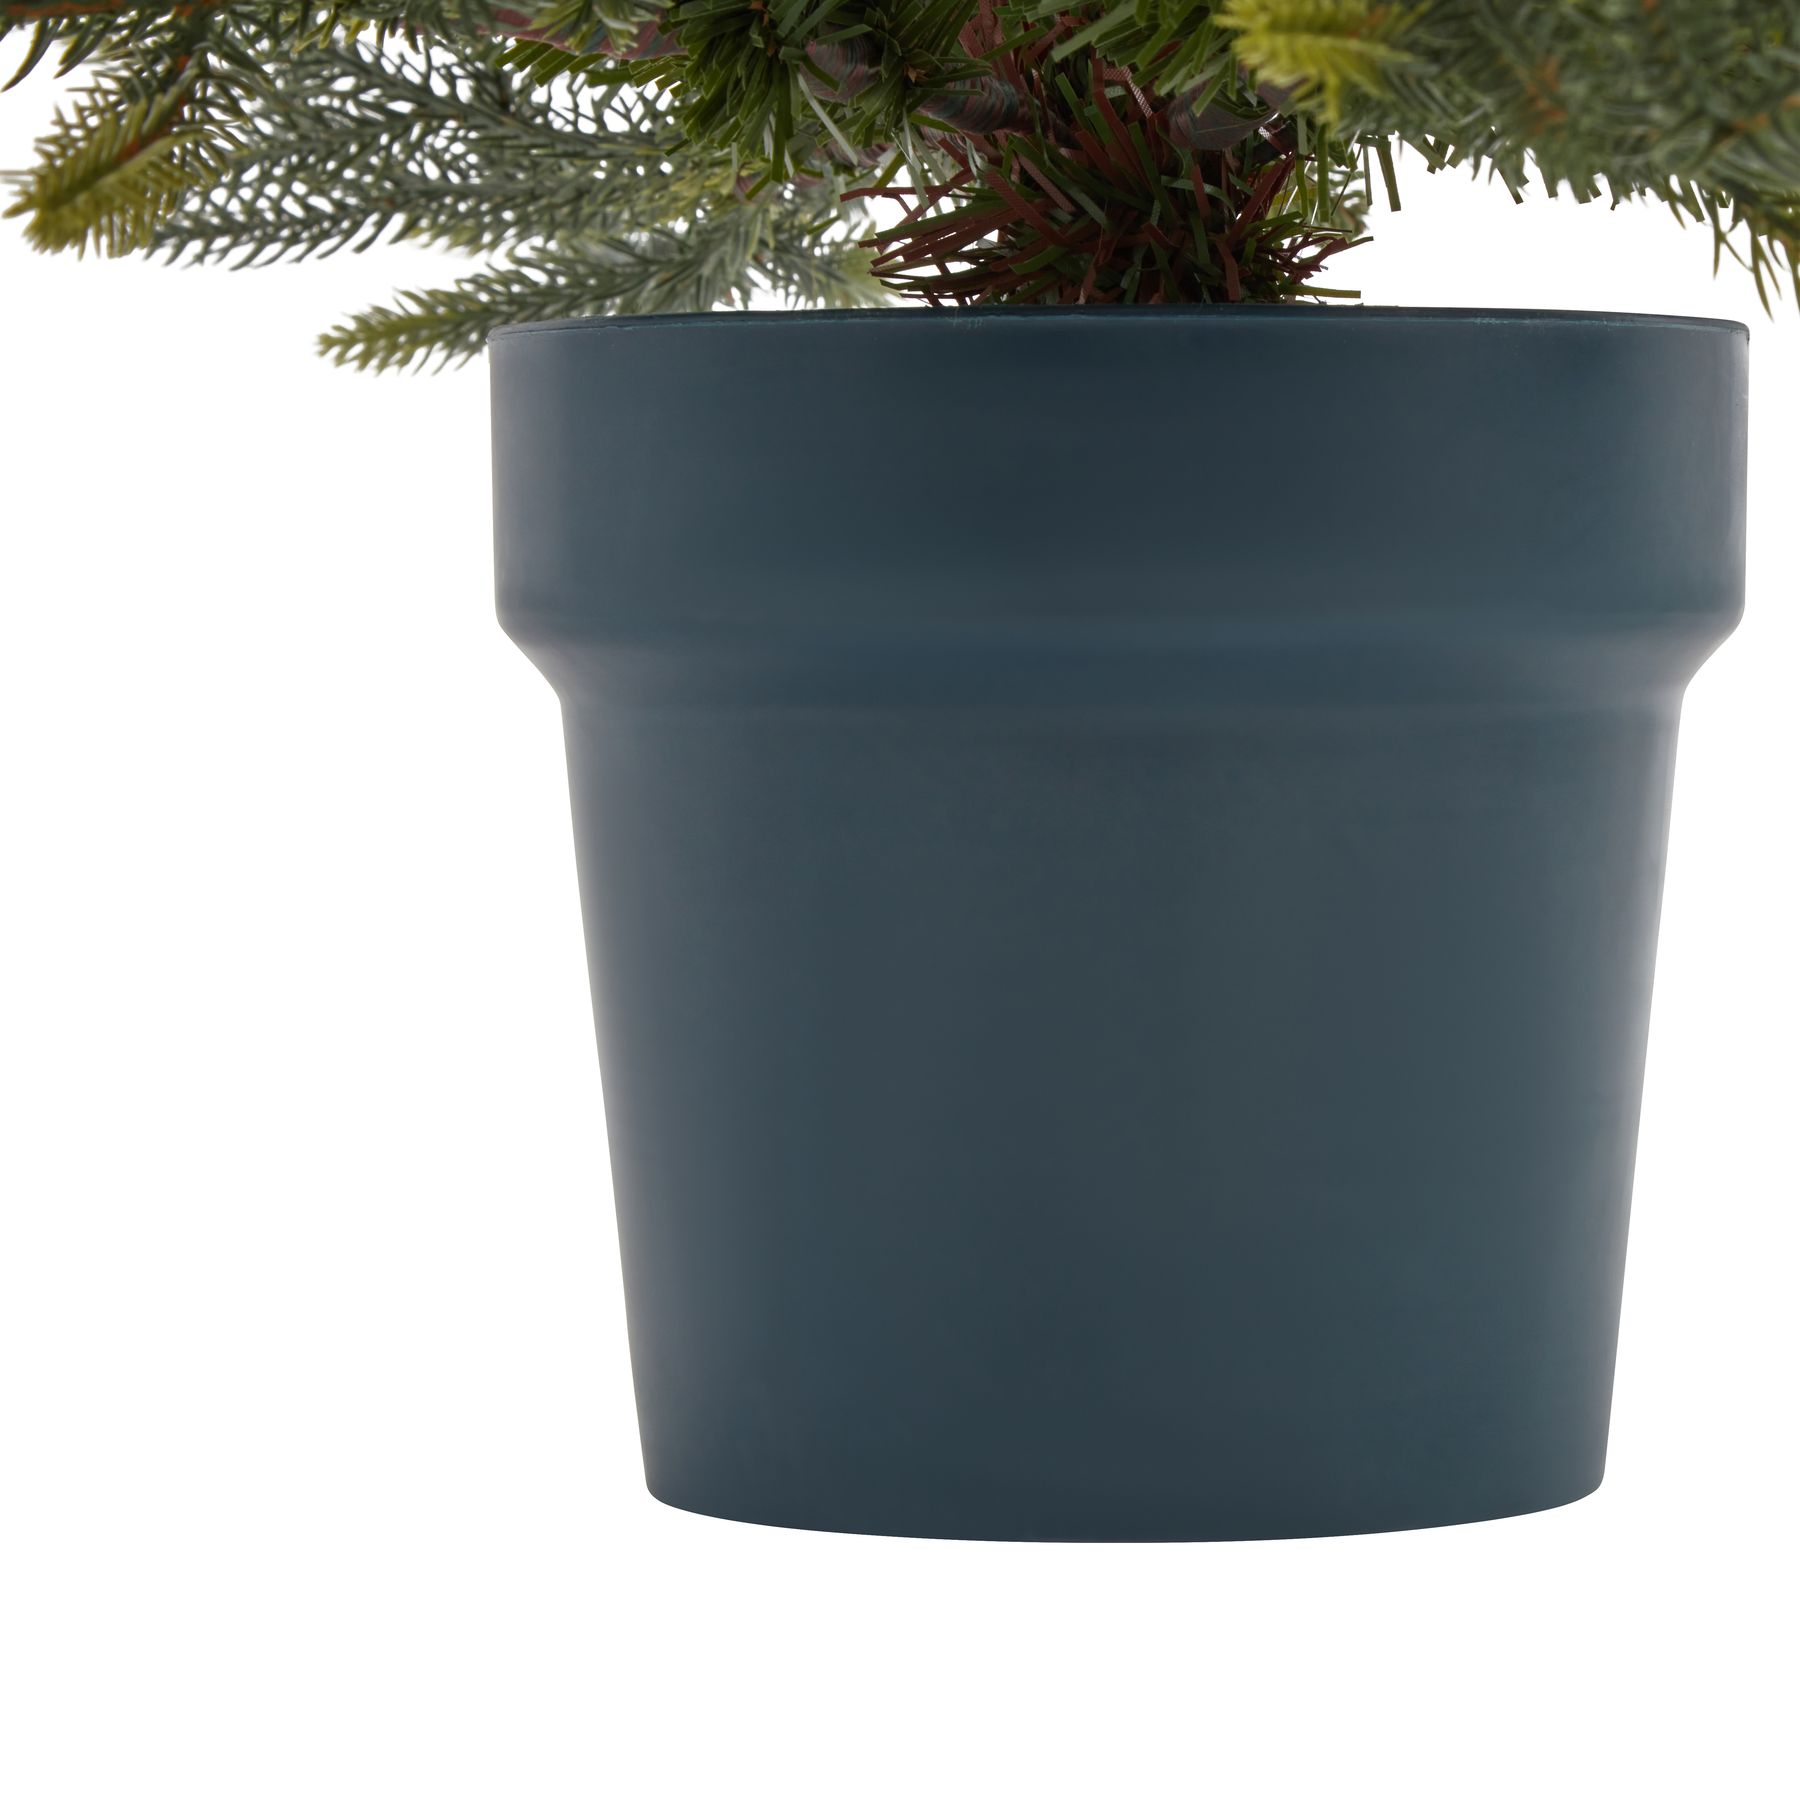 Potted Natural Pine Tree - Image 2